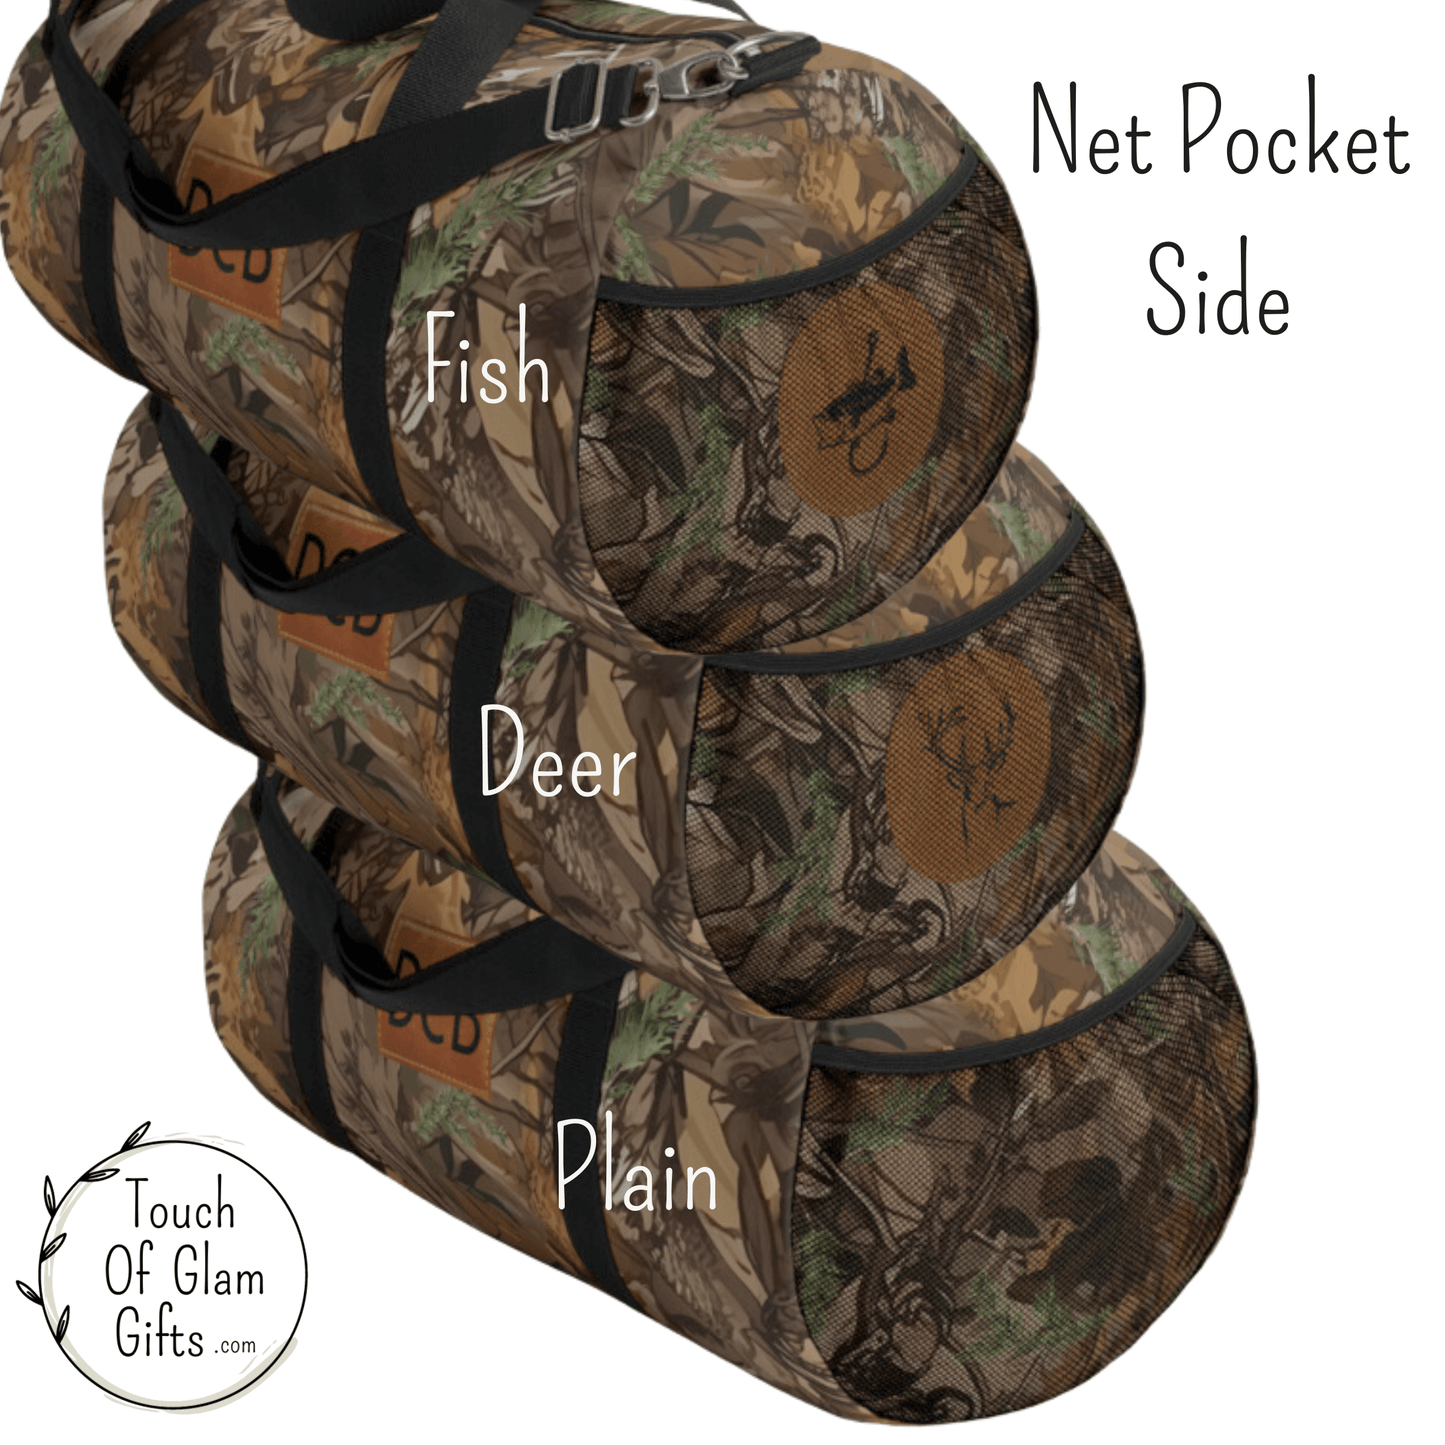 The left side of the camo duffel bag shows a netted pocket with the fish patch, deer head patch and the plain camo as an option to get on the personalized duffel bag.